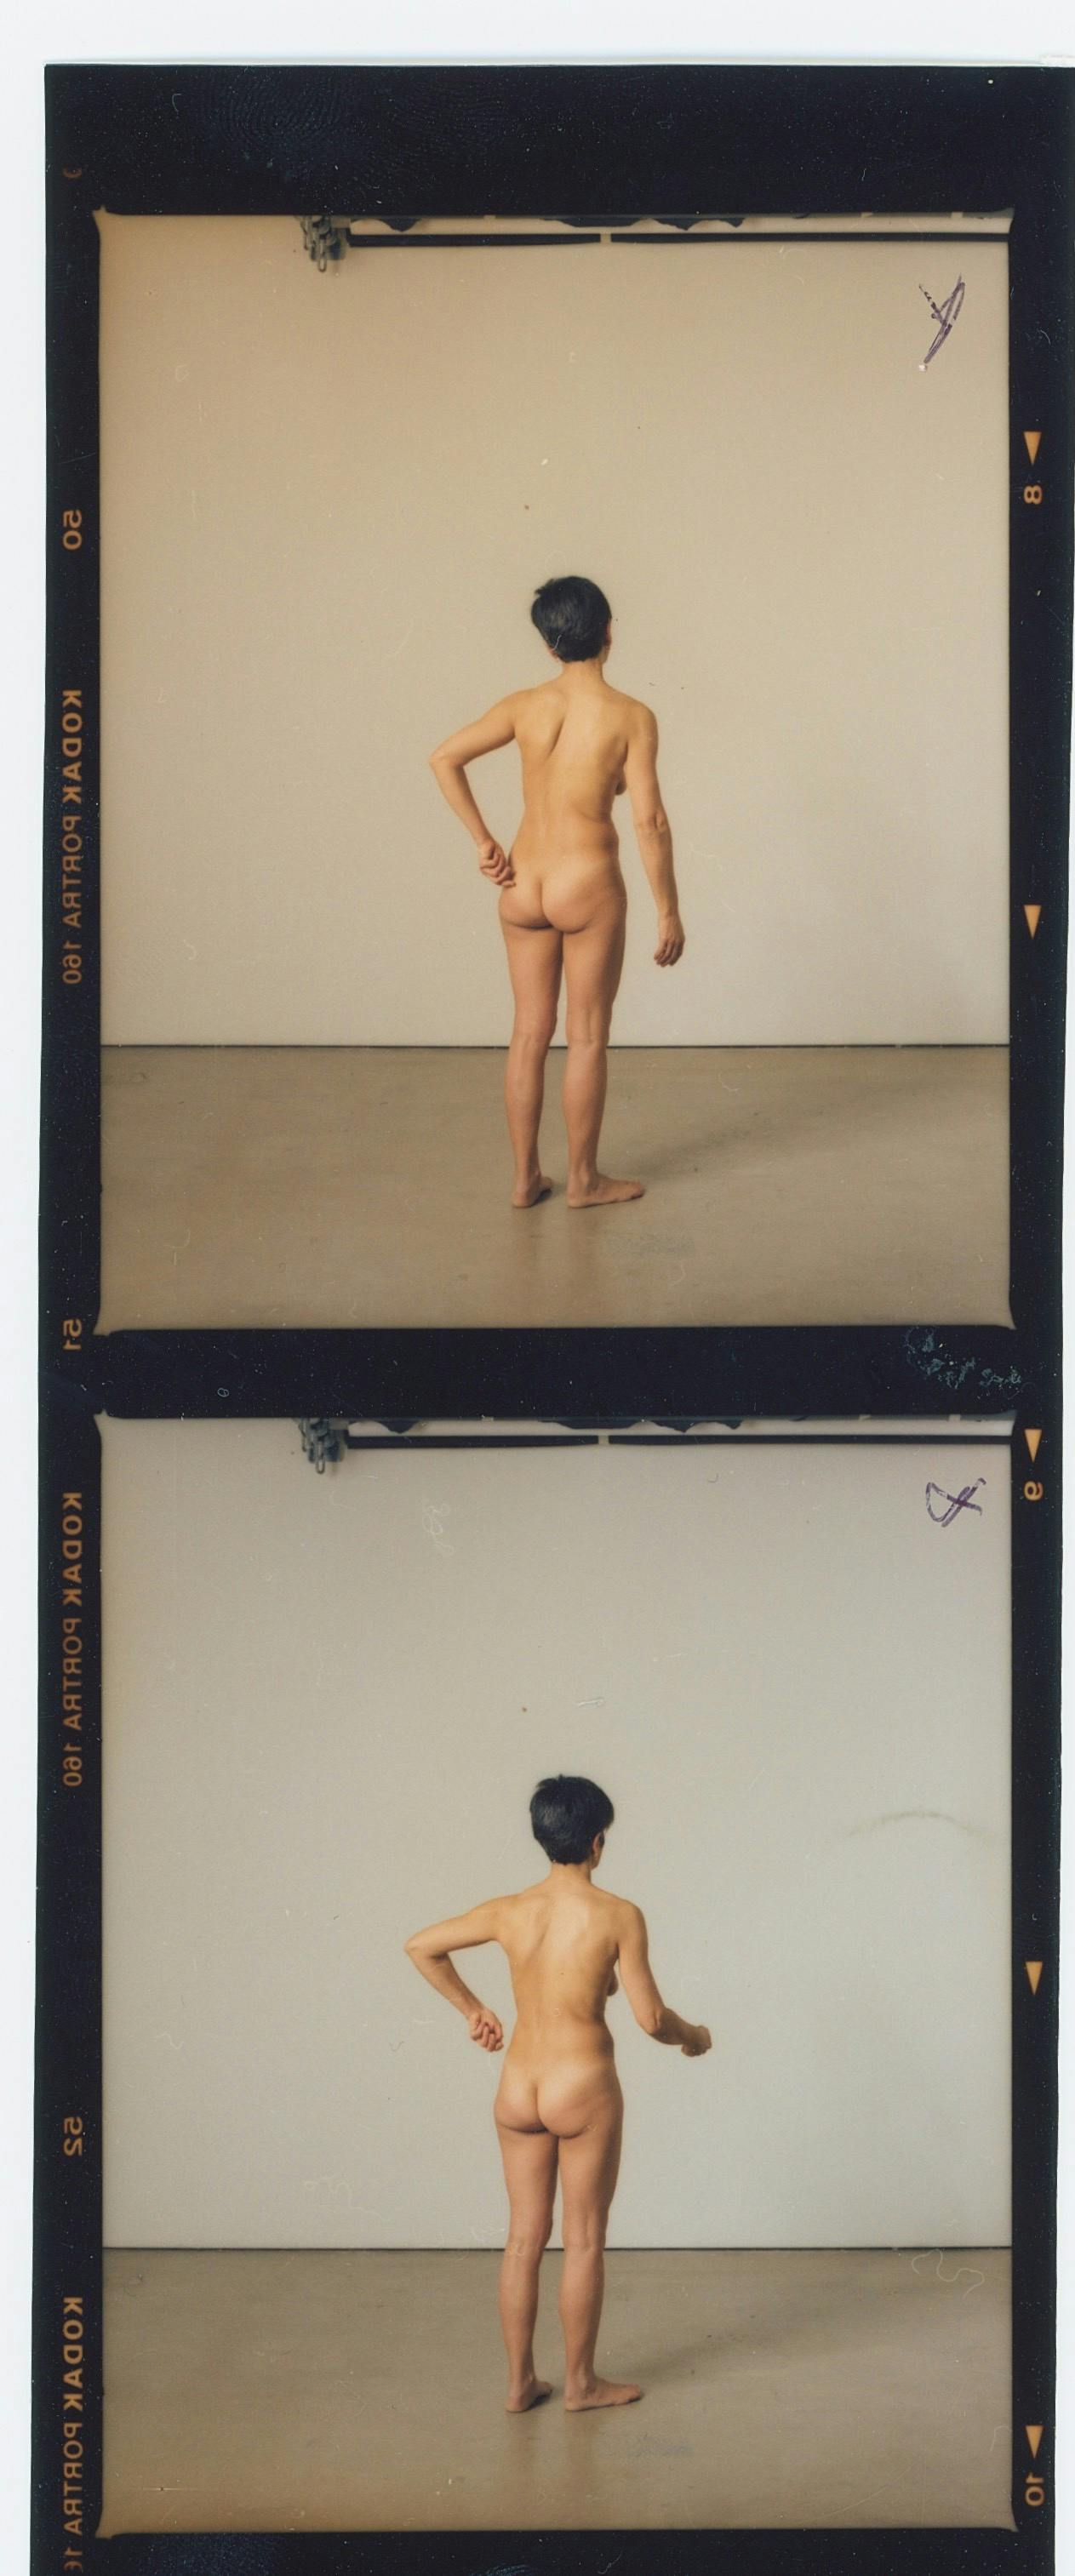 Contact sheet showing two images of the artist's mother's back, posing nude. © Eleonora Agostini